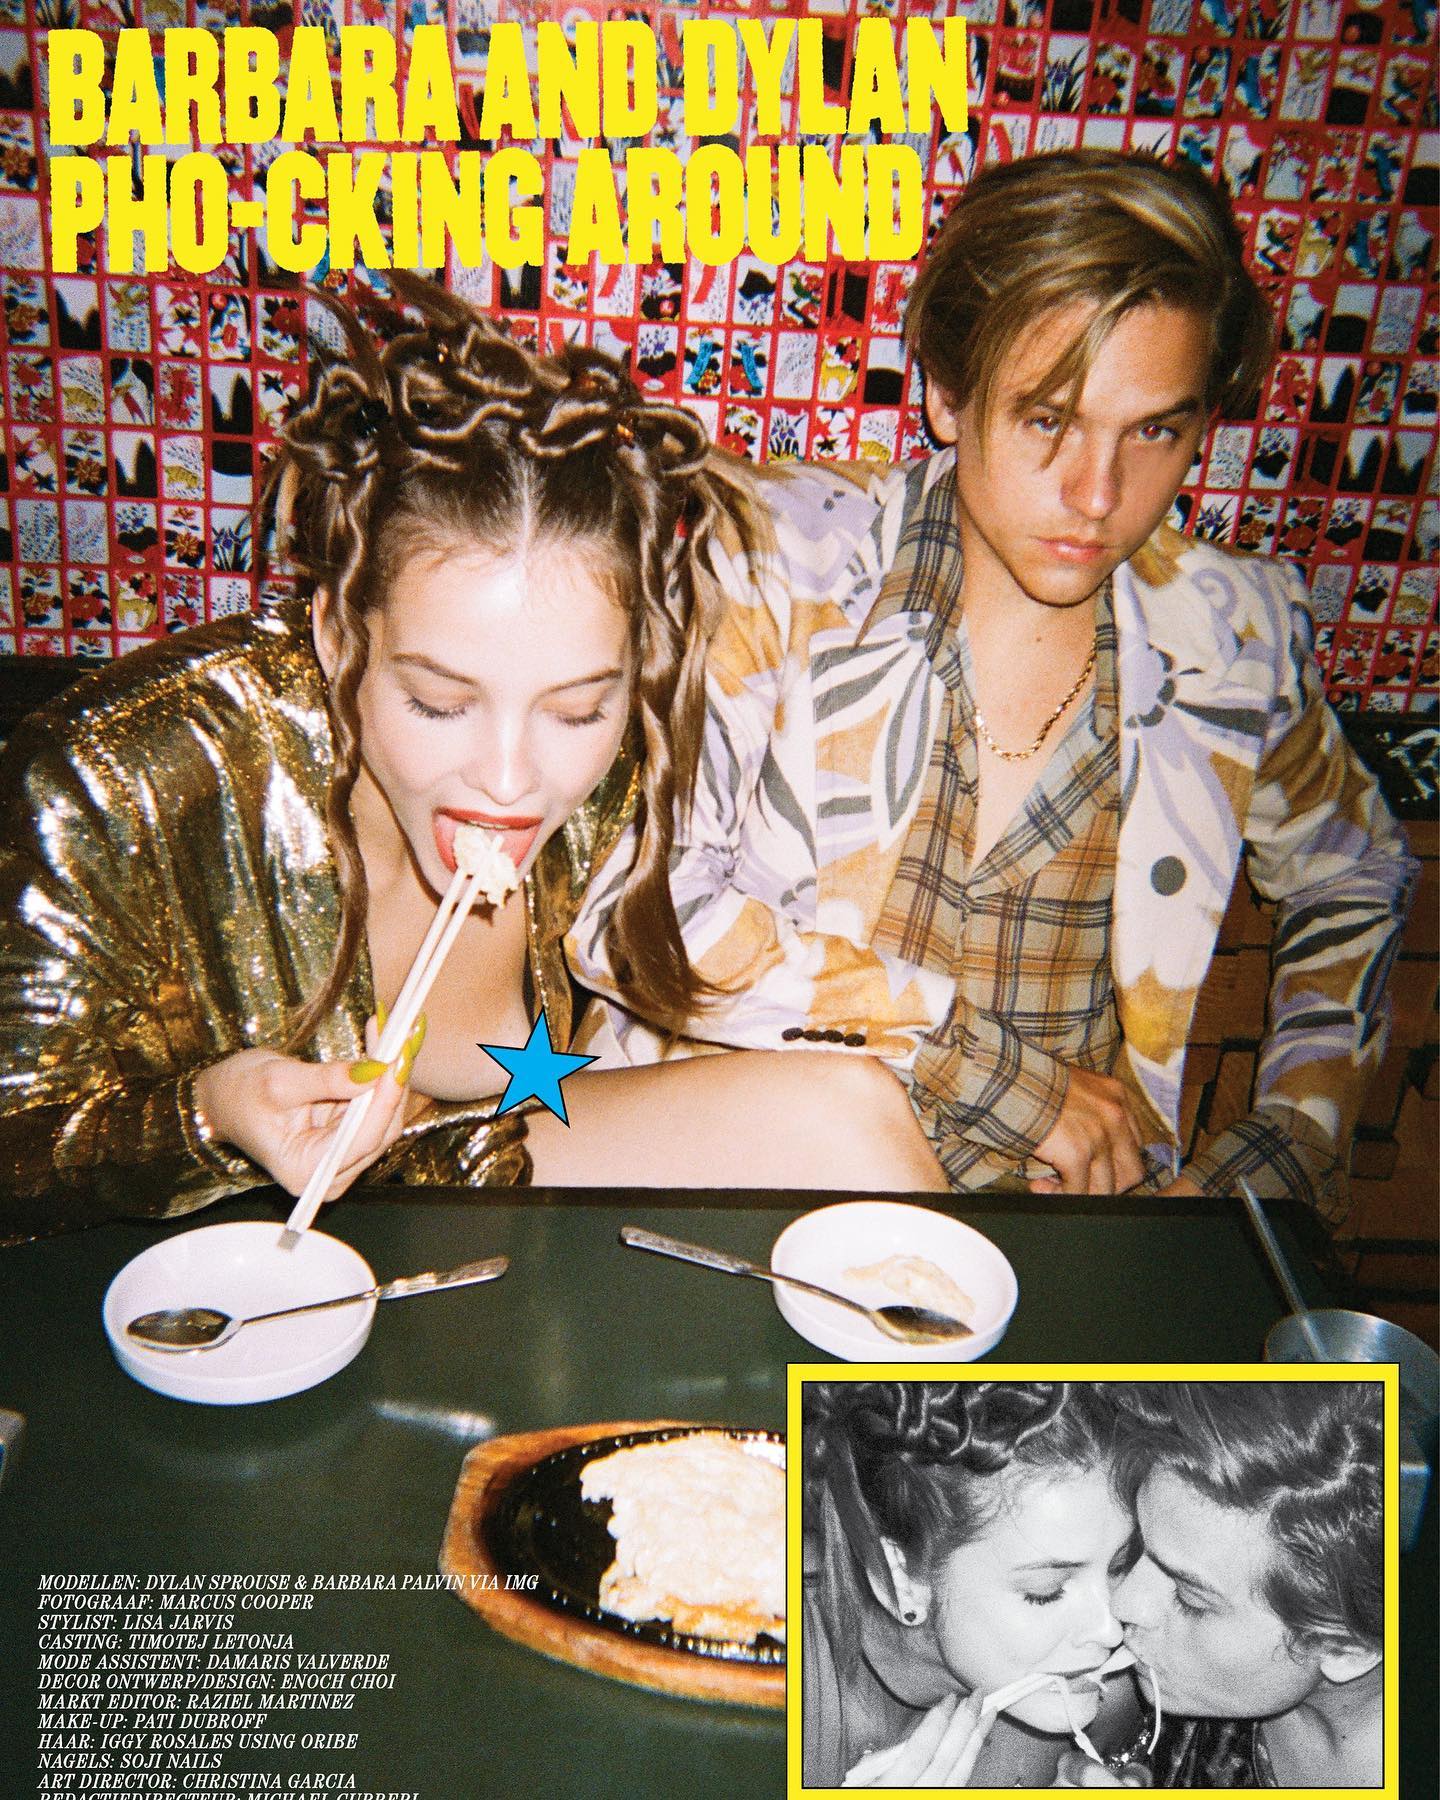 Barbara Palvin and Dylan Sprouse Hit the Cover! - Photo 12